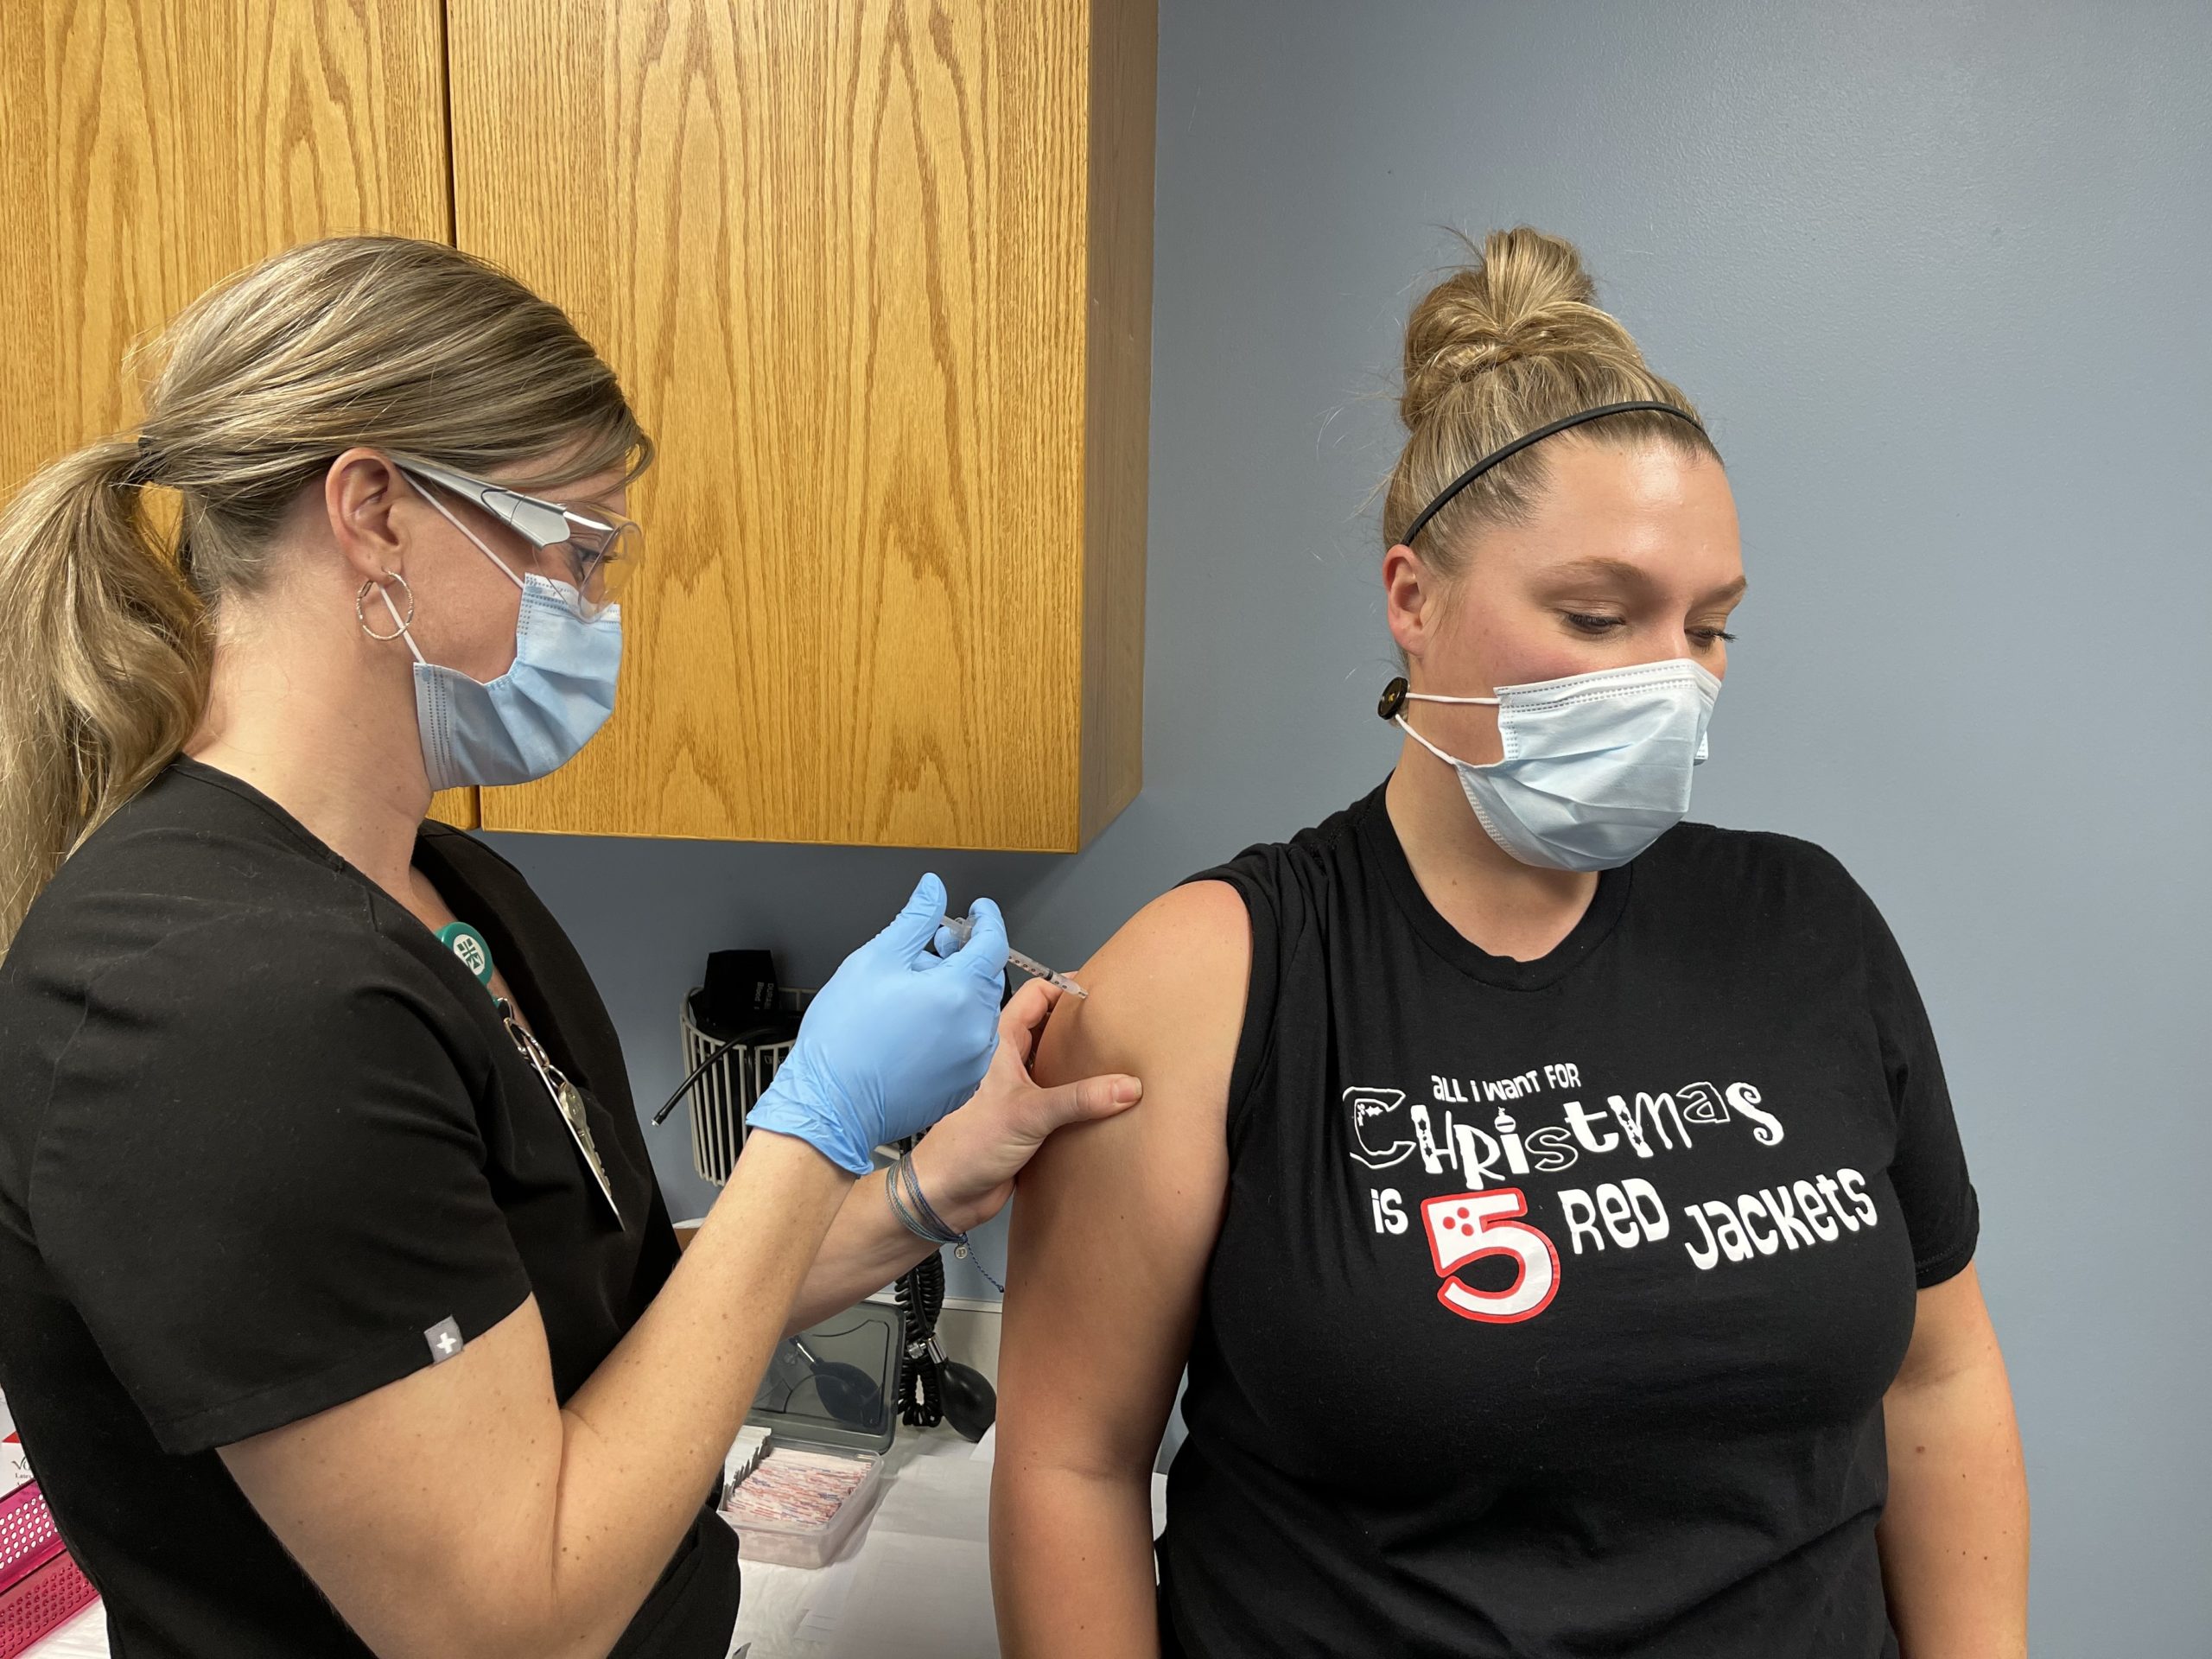 Nurse wearing black scrubs and face mask and goggles giving a COVID-19 vaccine to a woman with blonde hair, wearing a black tee shirt and mask and her hair up in a bun